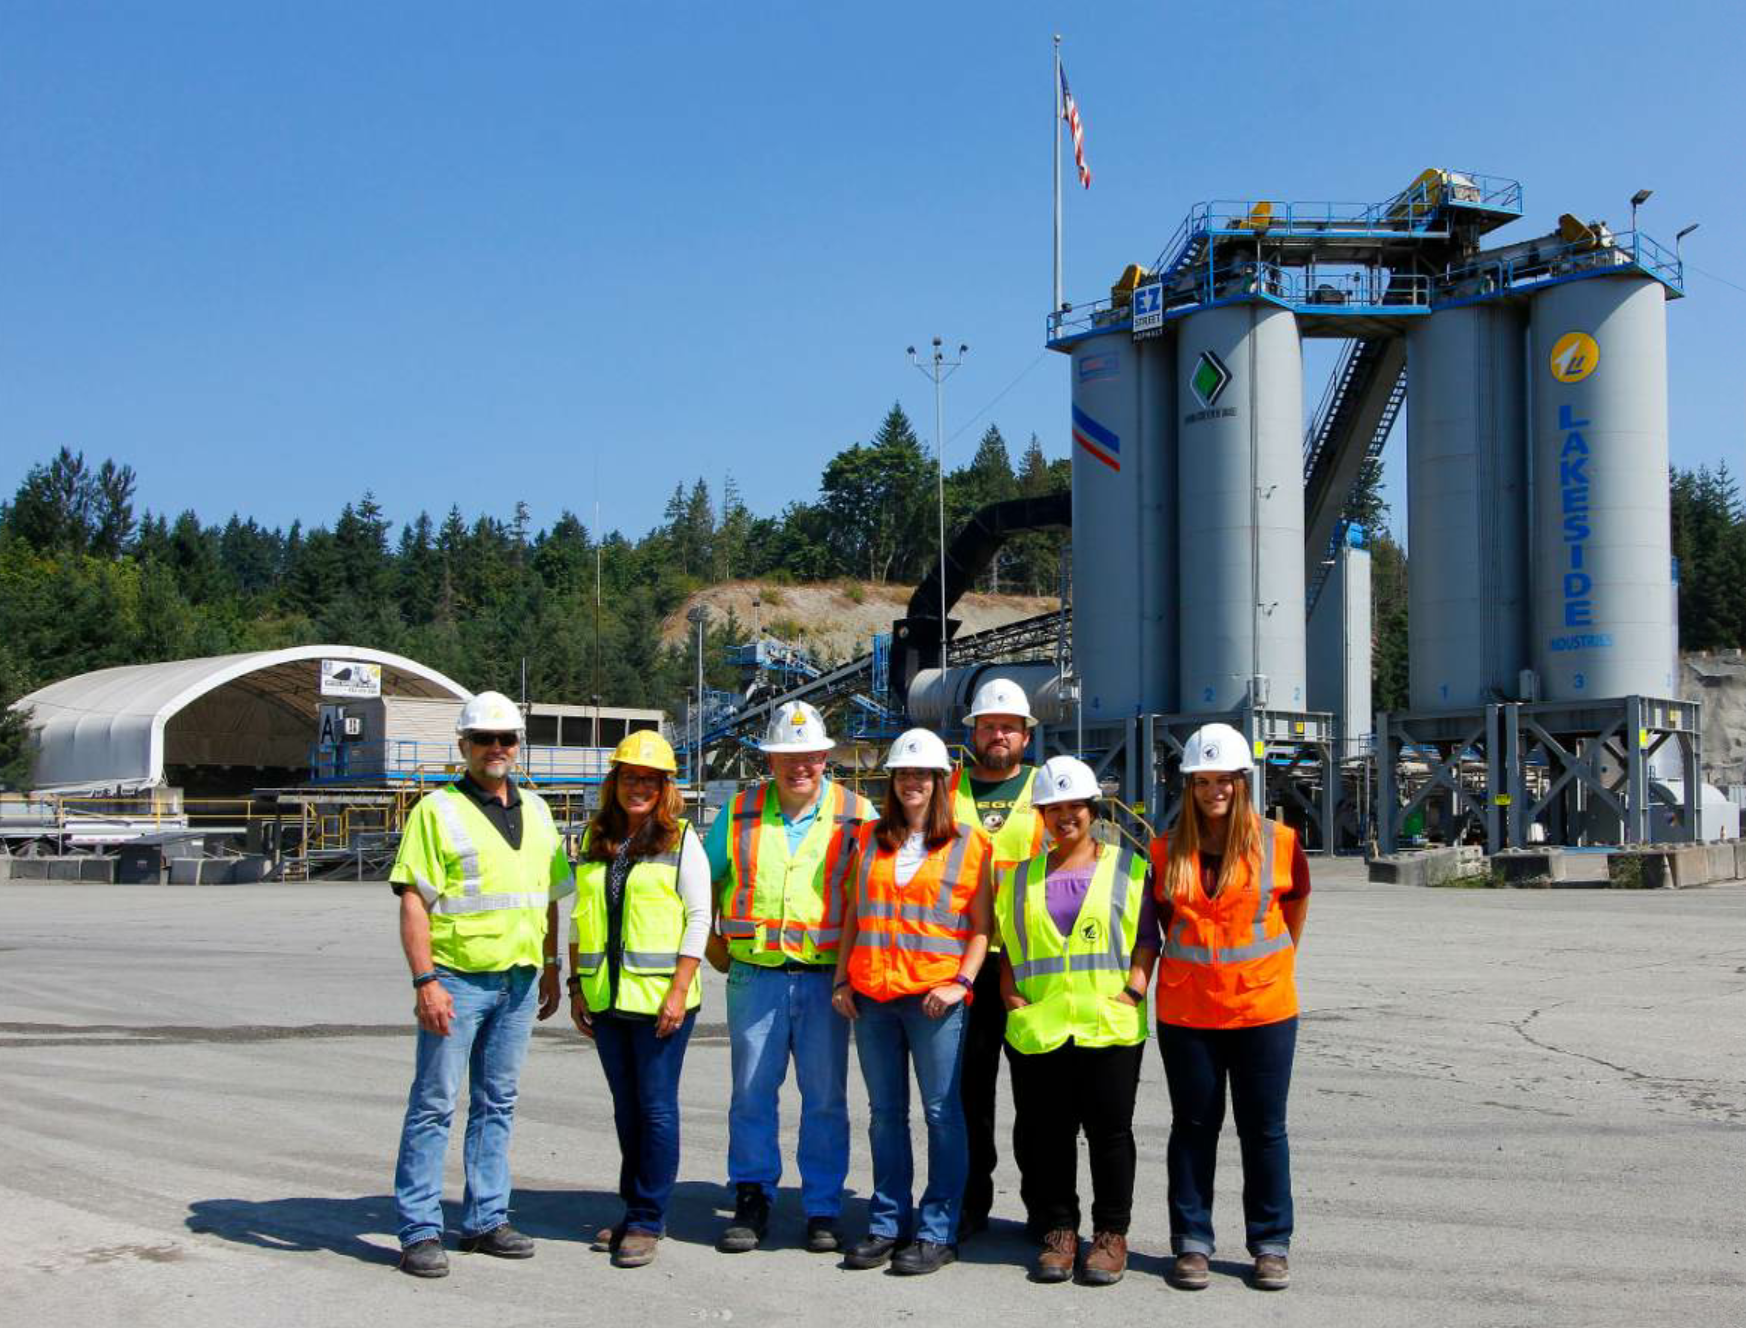 Lakeside Industries’ Risk Management and Safety Team (shown from left to right at the Issaquah, Washington site) is Safety & Claims Director Mike O’Neil (with Lakeside since 1988), Safety Specialist Rosa Connell (with Lakeside since 1988), Director of Risk Management Cal Beyer (with Lakeside since 2014), Risk Management & Safety Coordinator Melanie Foister (with Lakeside since 2012), Safety Specialist Mike Shute (with Lakeside since 2011), Risk Management & Safety Administrative Assistant Nisha Choughule (with Lakeside since 2016), and Safety & Health Management Intern Elena Wagar (Central Washington University; summer 2017). Photographer Ryan Anderson.